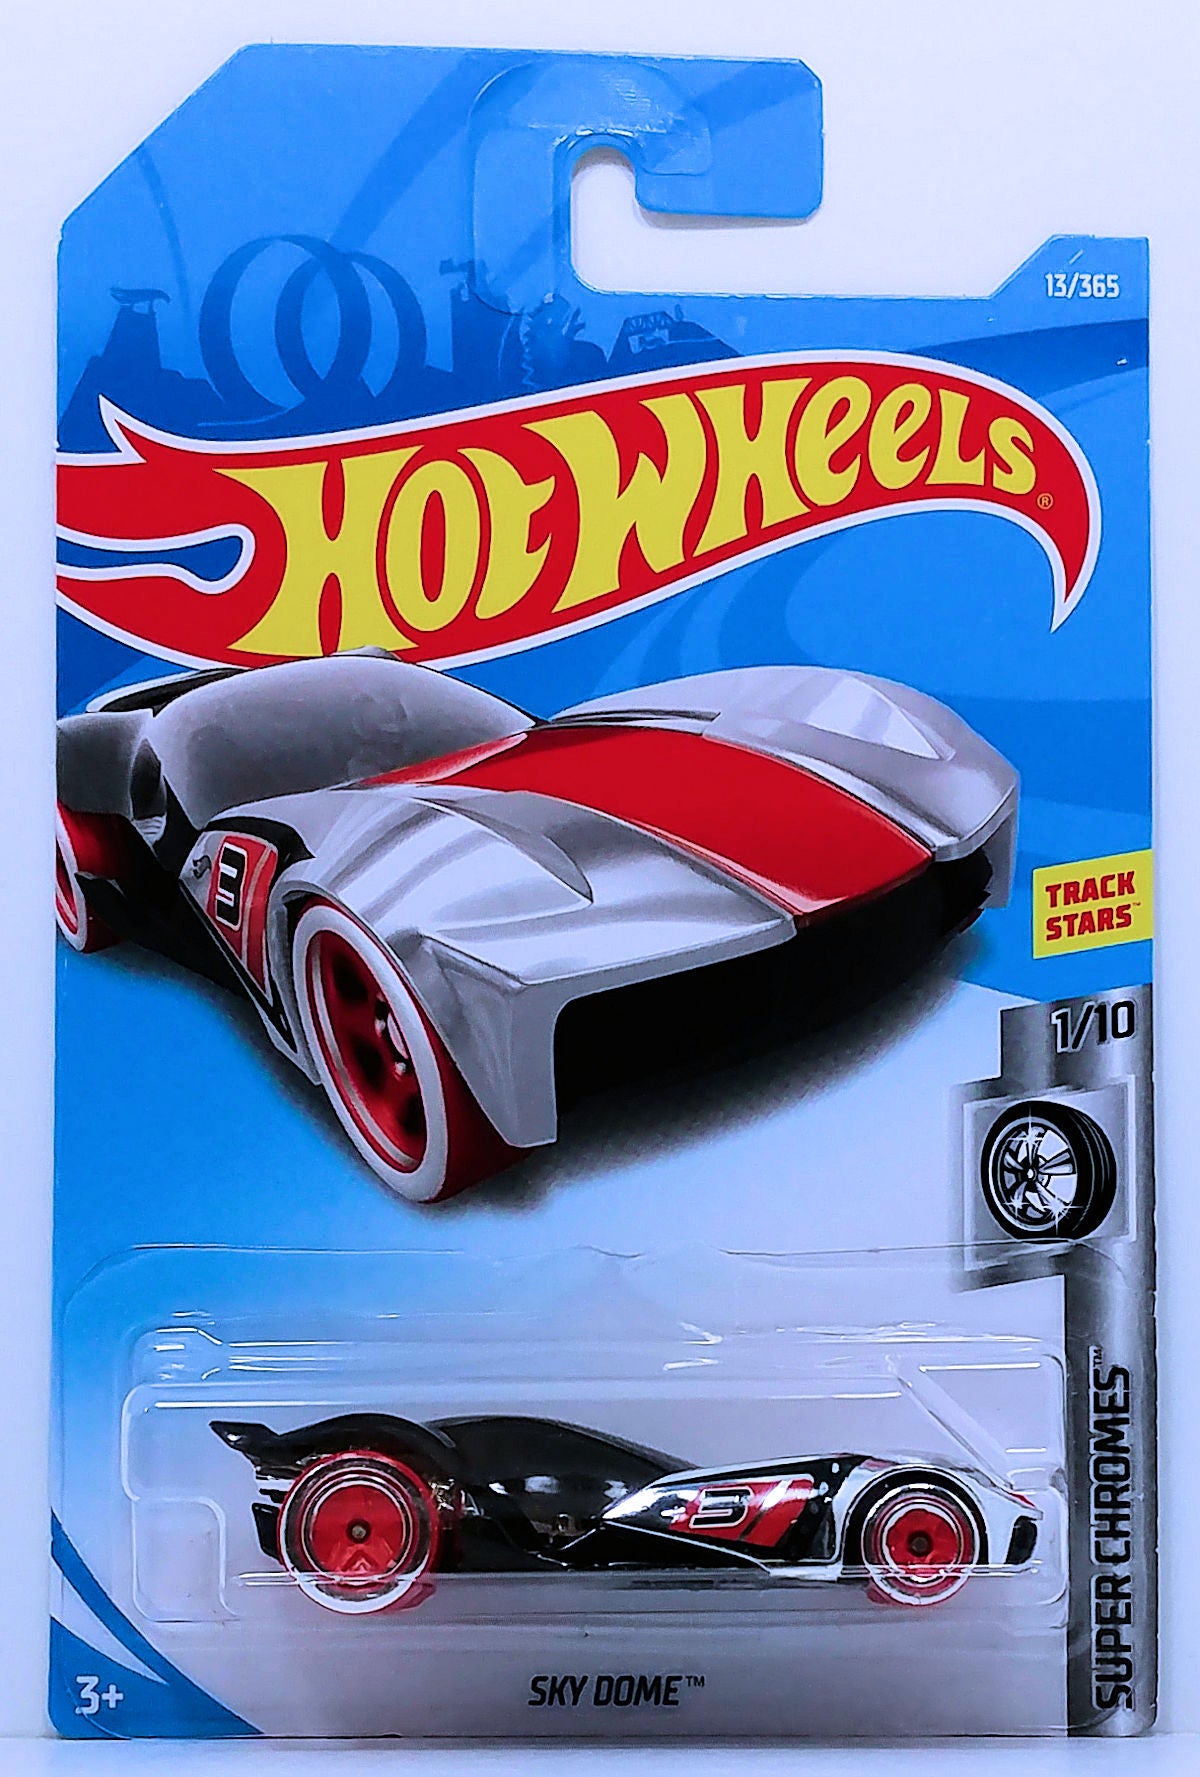 Hot Wheels 2018 - Collector # 013/365 - Super Chromes 1/10 - Sky Dome - Chrome - IC